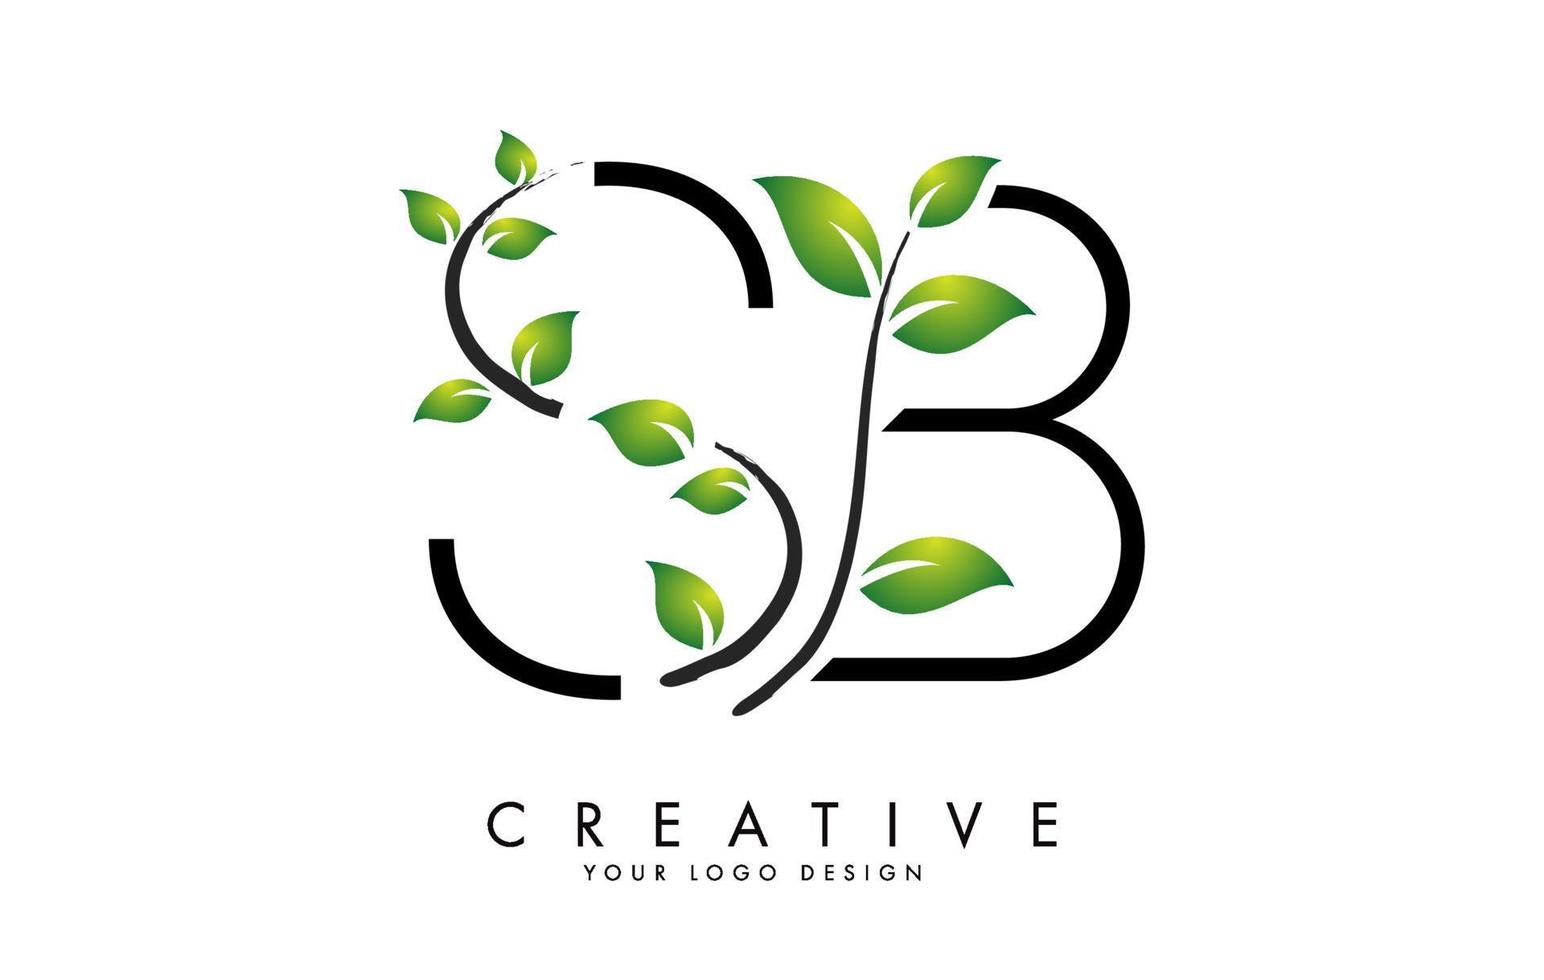 Leaf Letters SB S B Logo Design with Green Leaves on a Branch. Letters SB S B with nature concept. vector